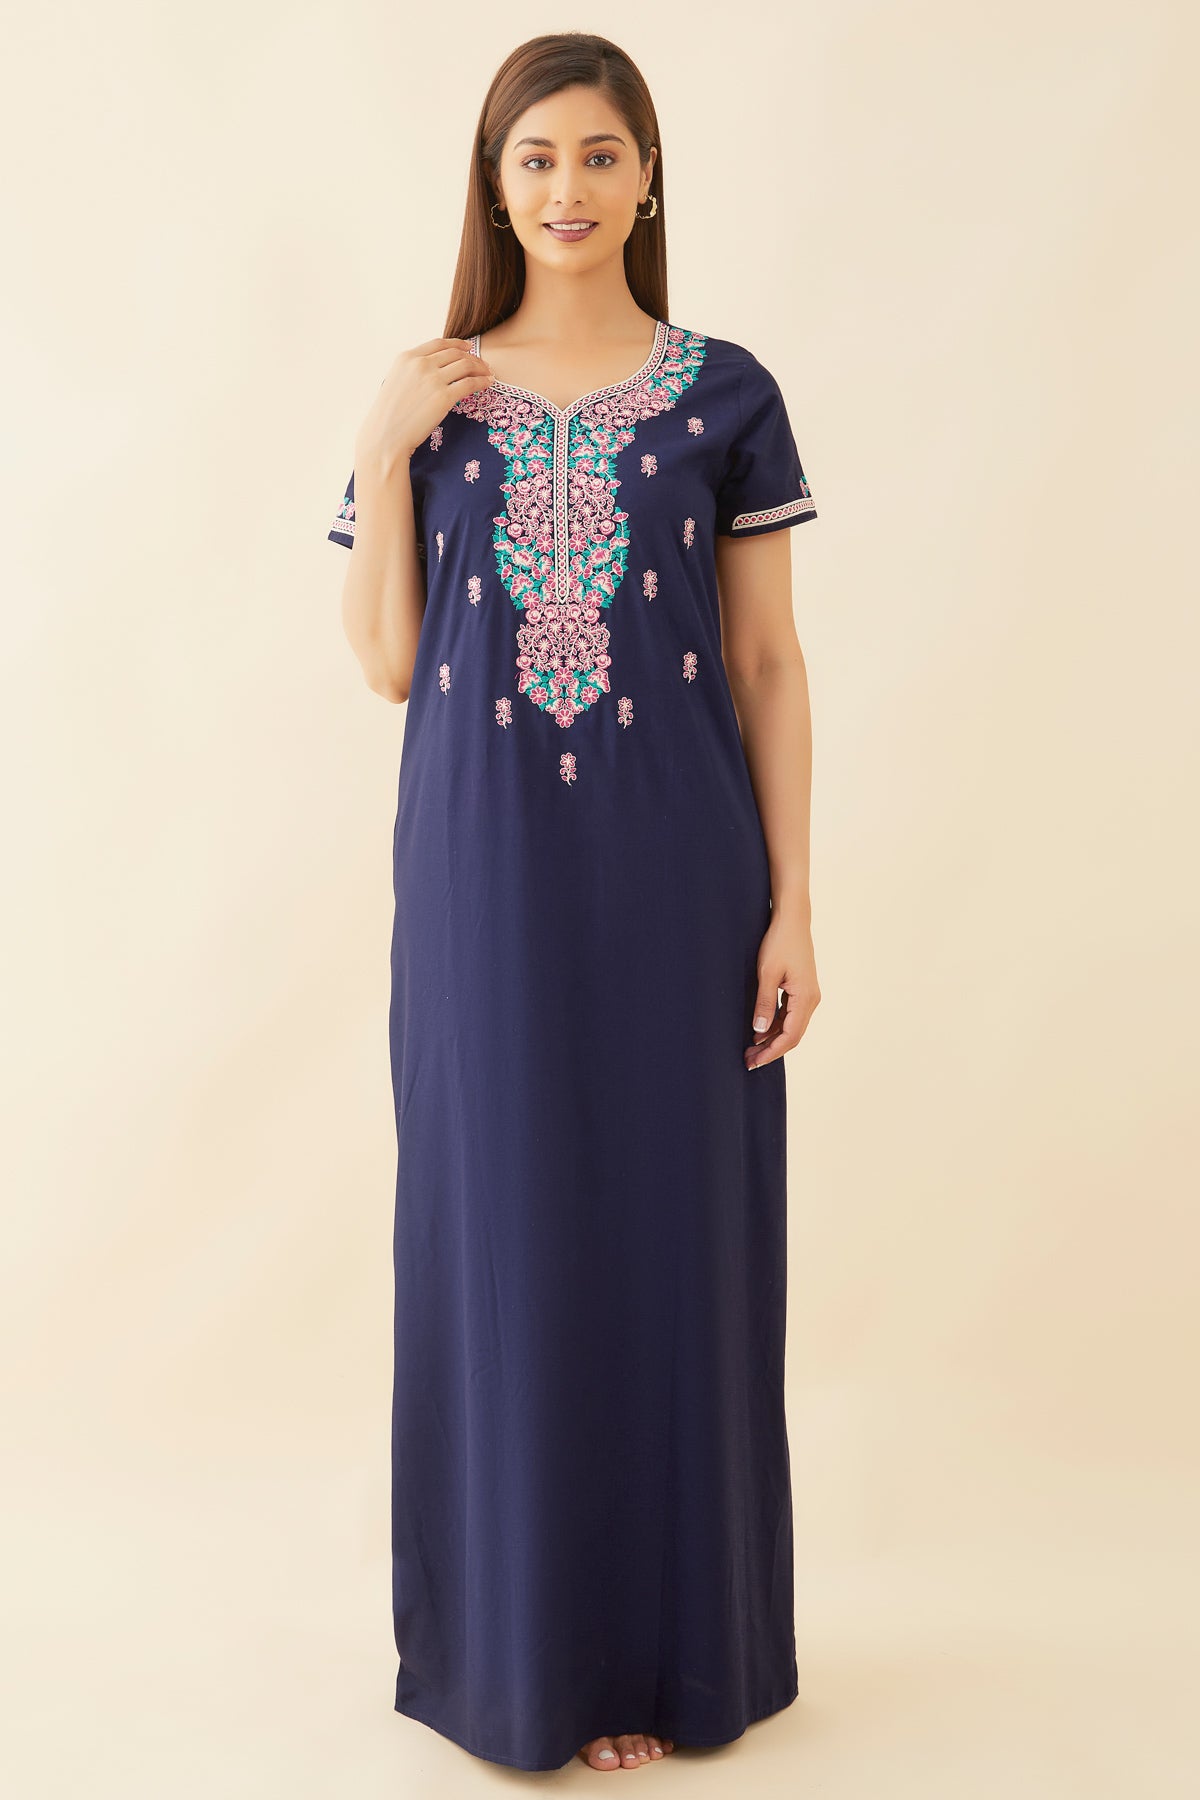 Contrast Floral Embroidered Yoke Nighty - Navy